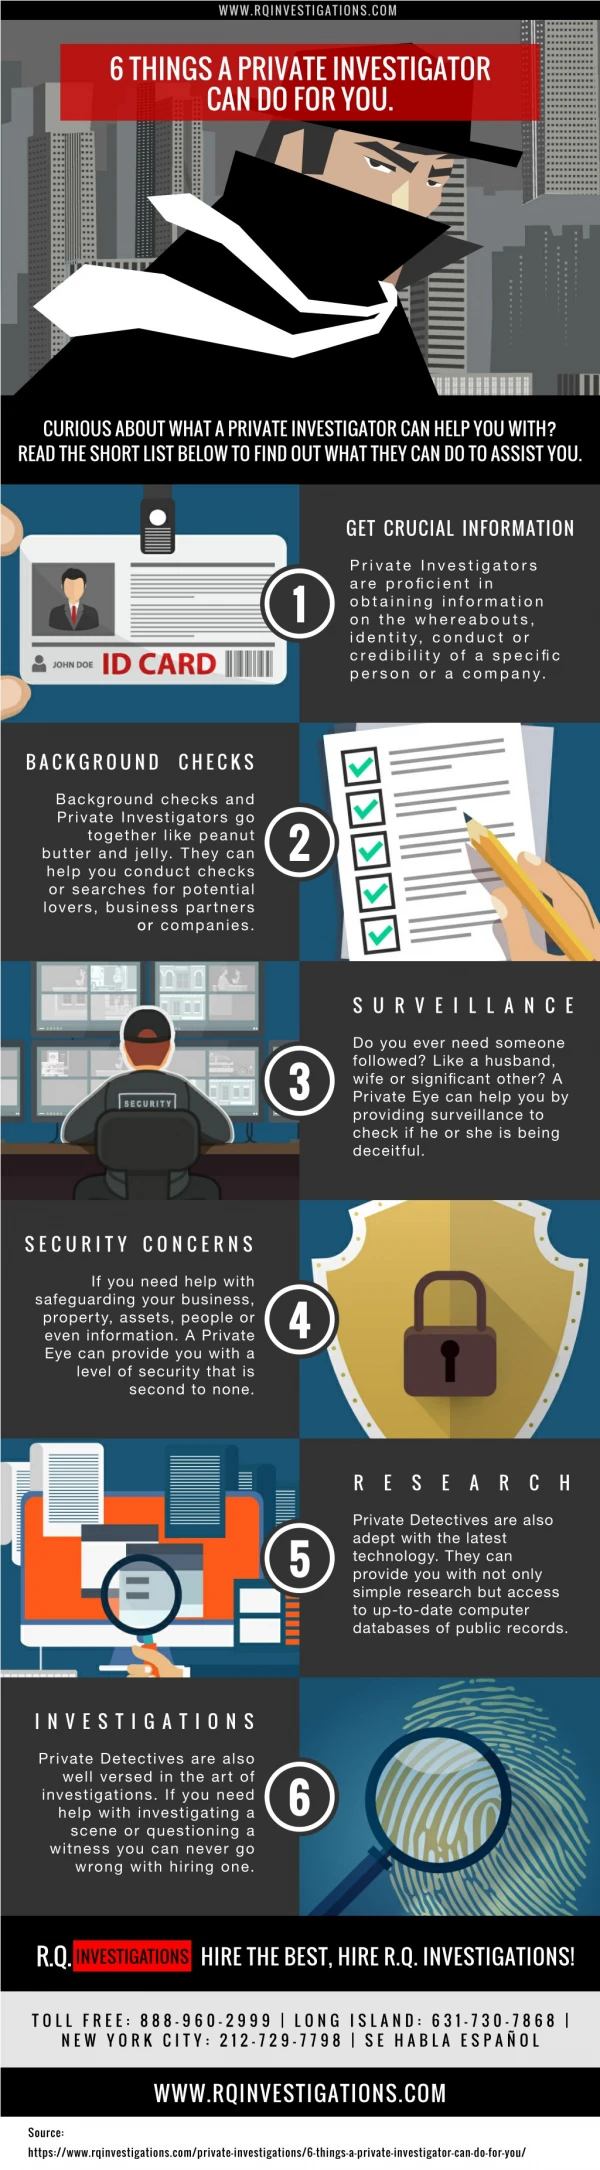 6 Things a Private Investigator Can Do For You